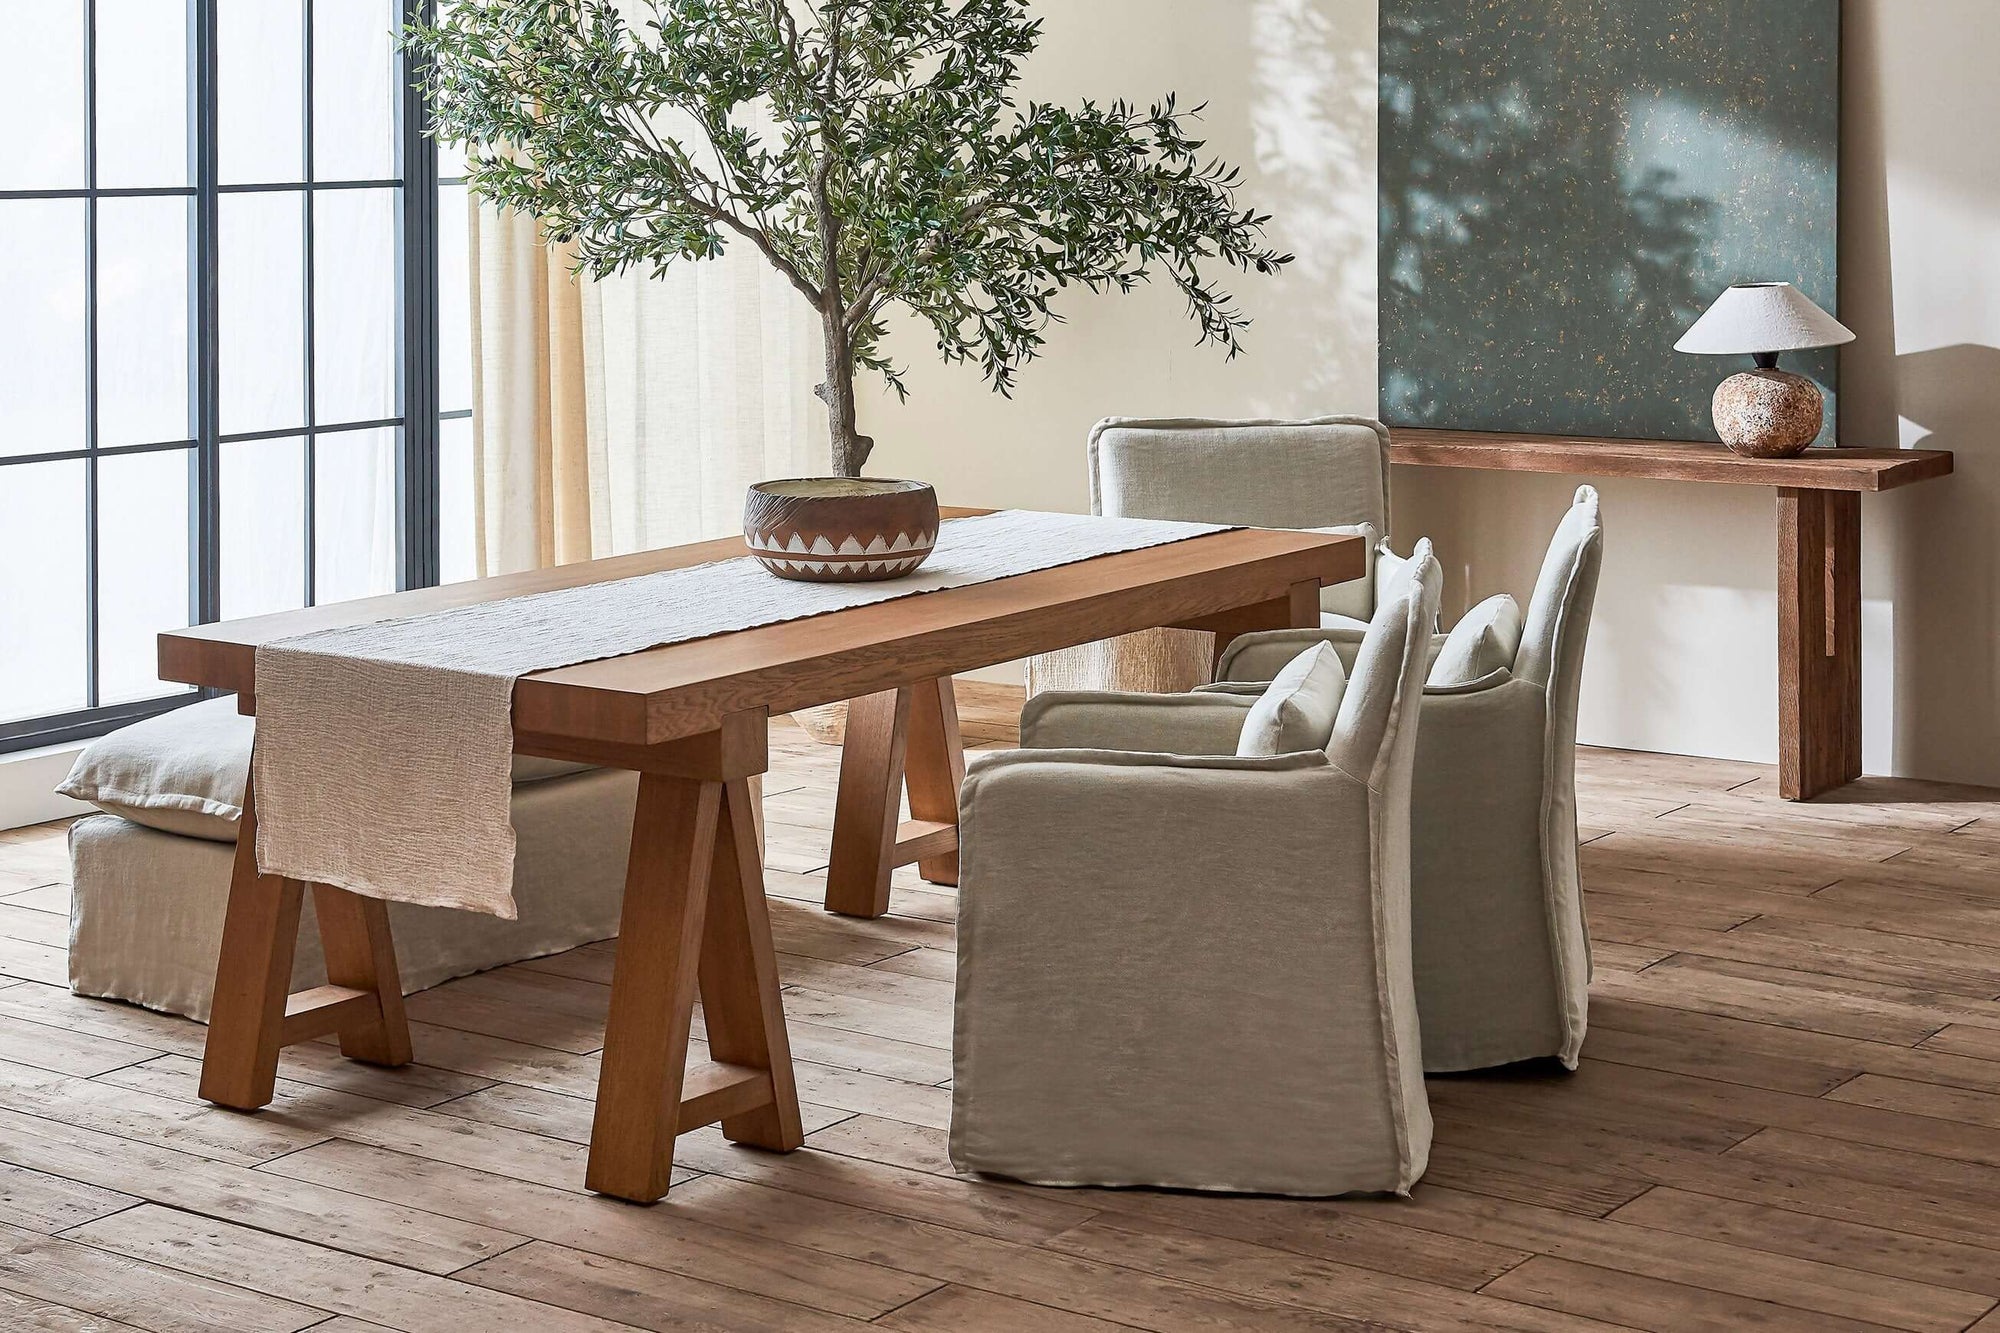 Two Melo Dining Chairs in Jasmine Rice, a light warm greige Medium Weight Linen, sitting at a Rylance Dining Table with a Neva Dining Bench